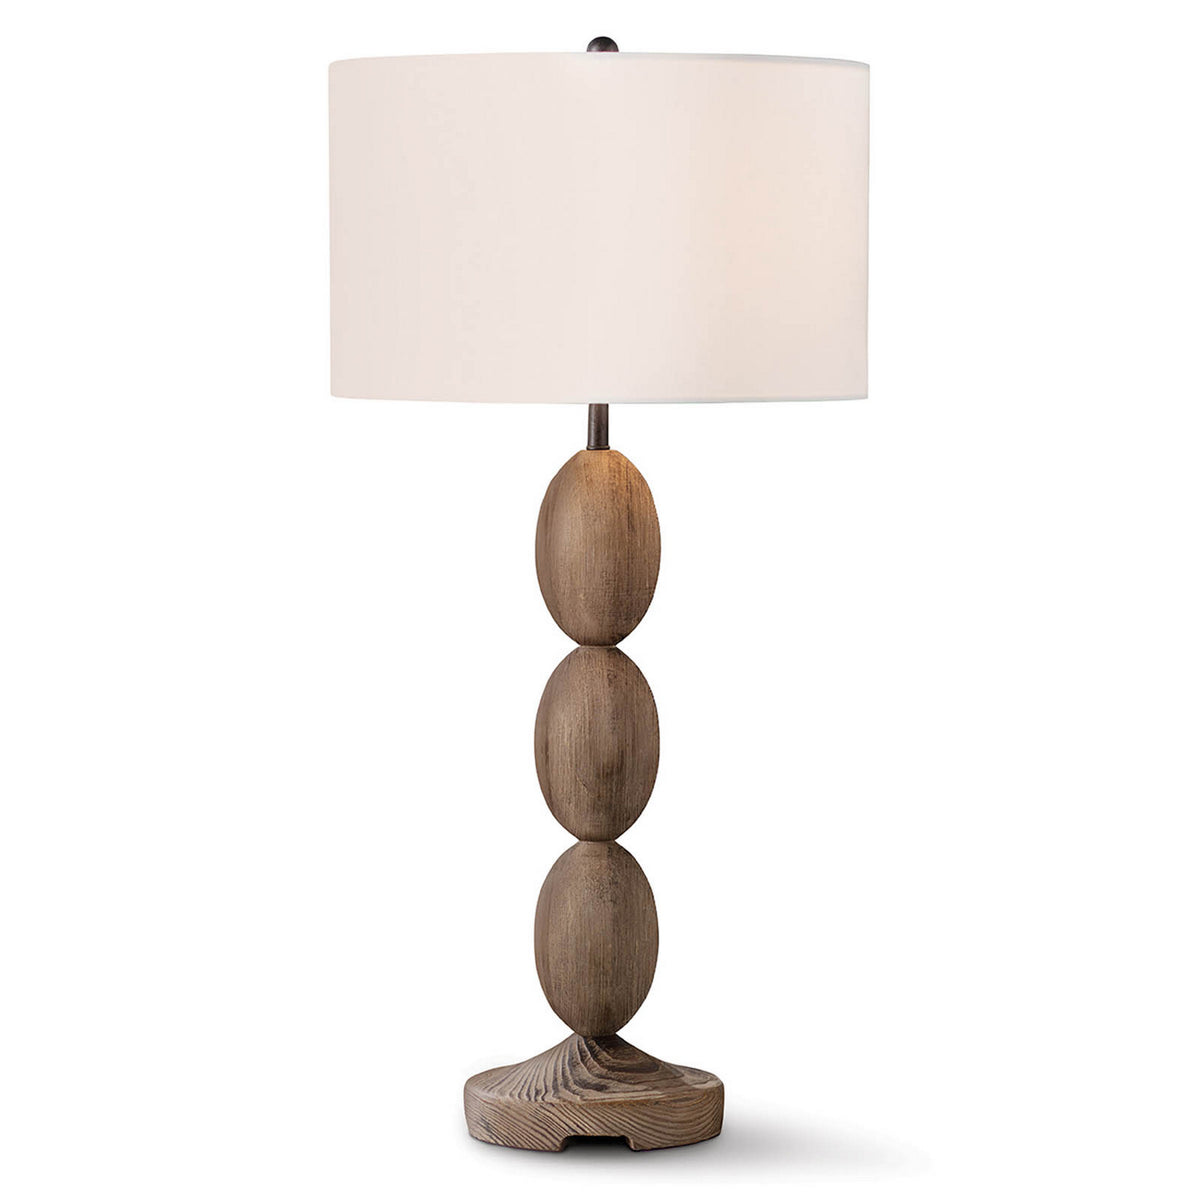 Regina Andrew - 13-1356 - One Light Table Lamp - Buoy - Natural